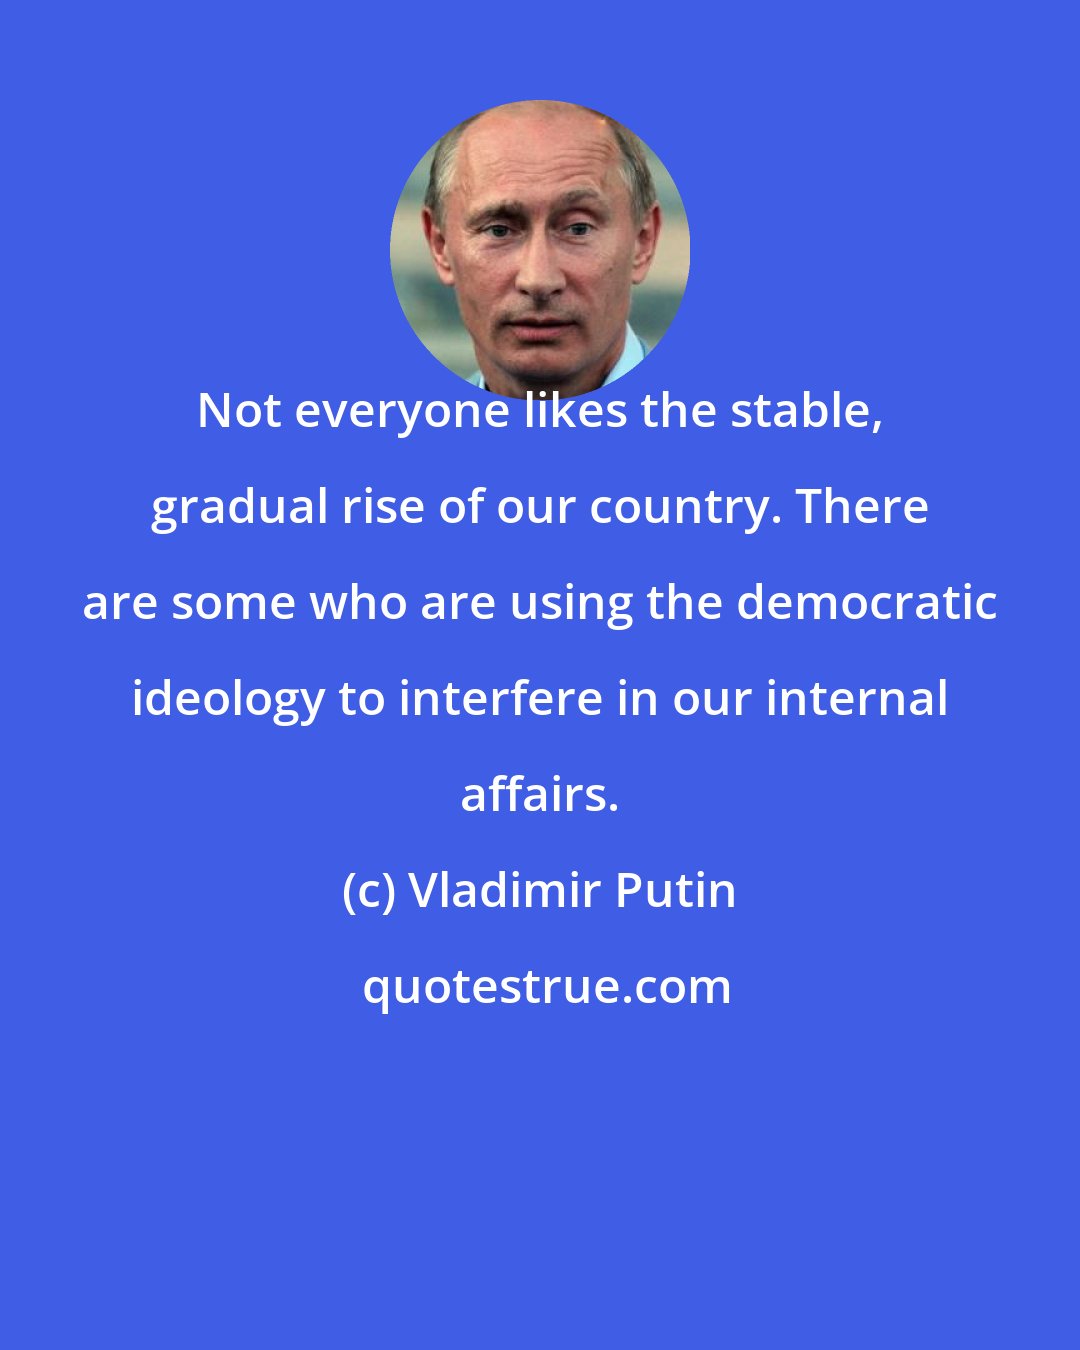 Vladimir Putin: Not everyone likes the stable, gradual rise of our country. There are some who are using the democratic ideology to interfere in our internal affairs.